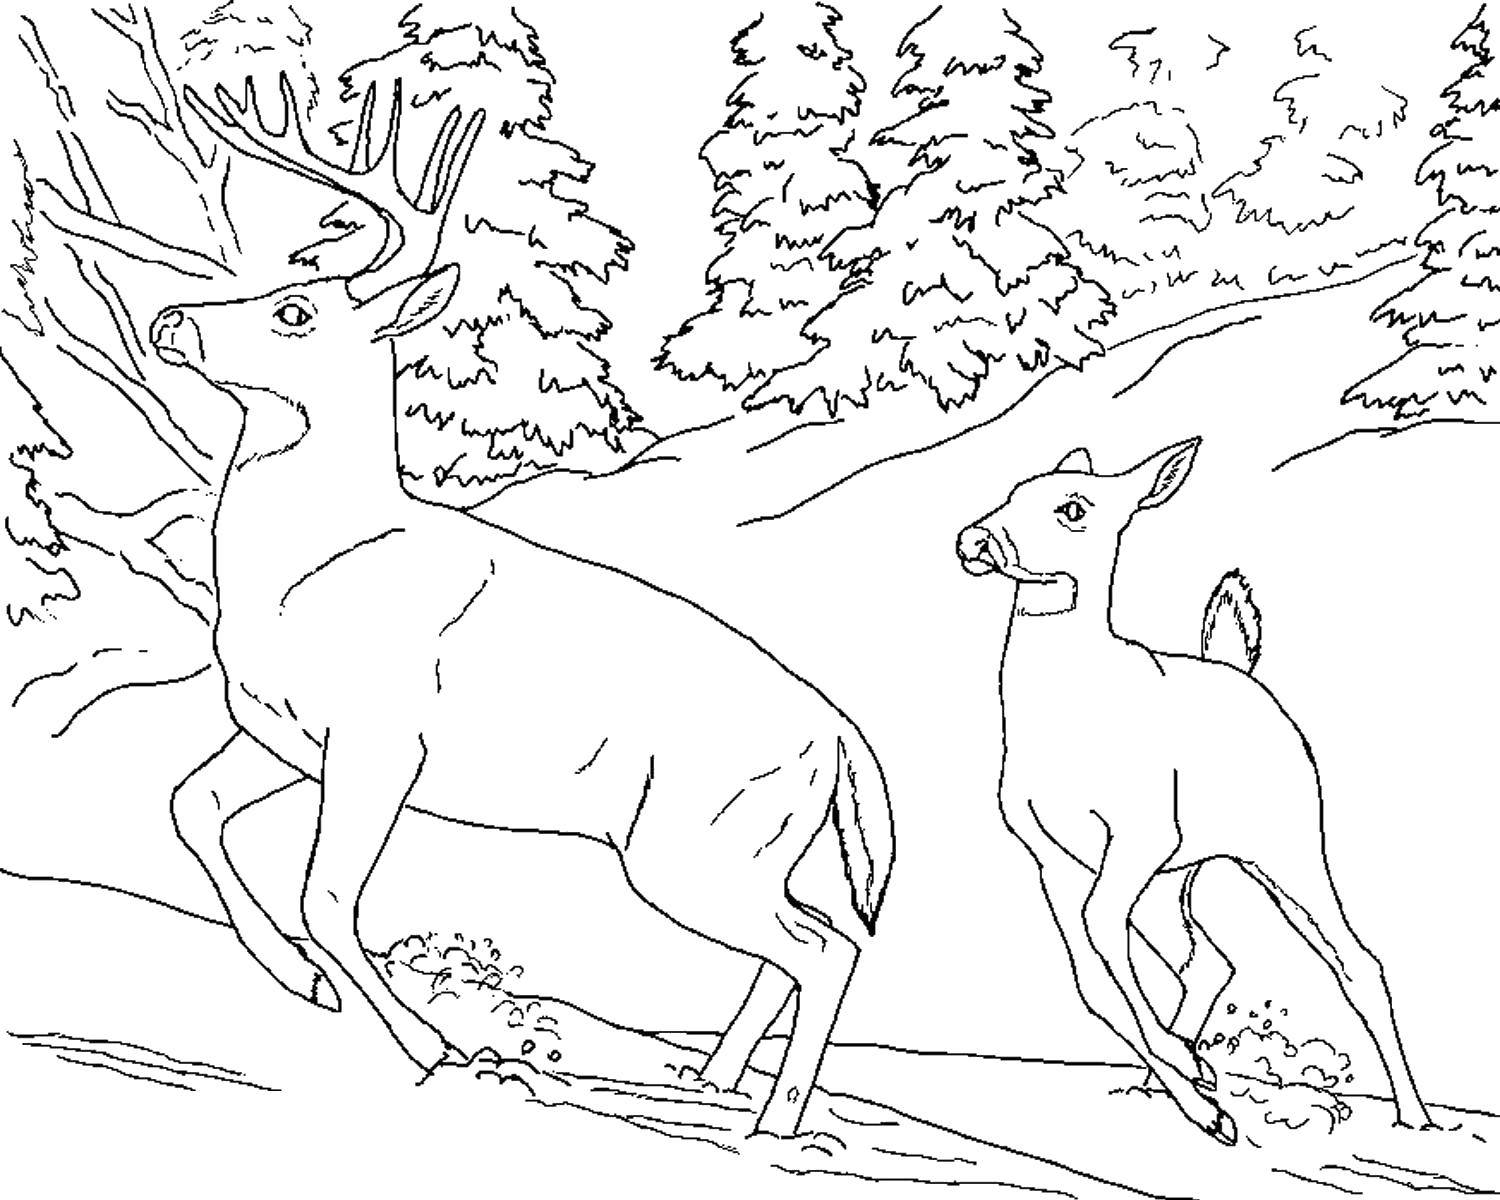 Coloring Deer run away from a predator. Category the forest. Tags:  Nature, forest, animals, deer.